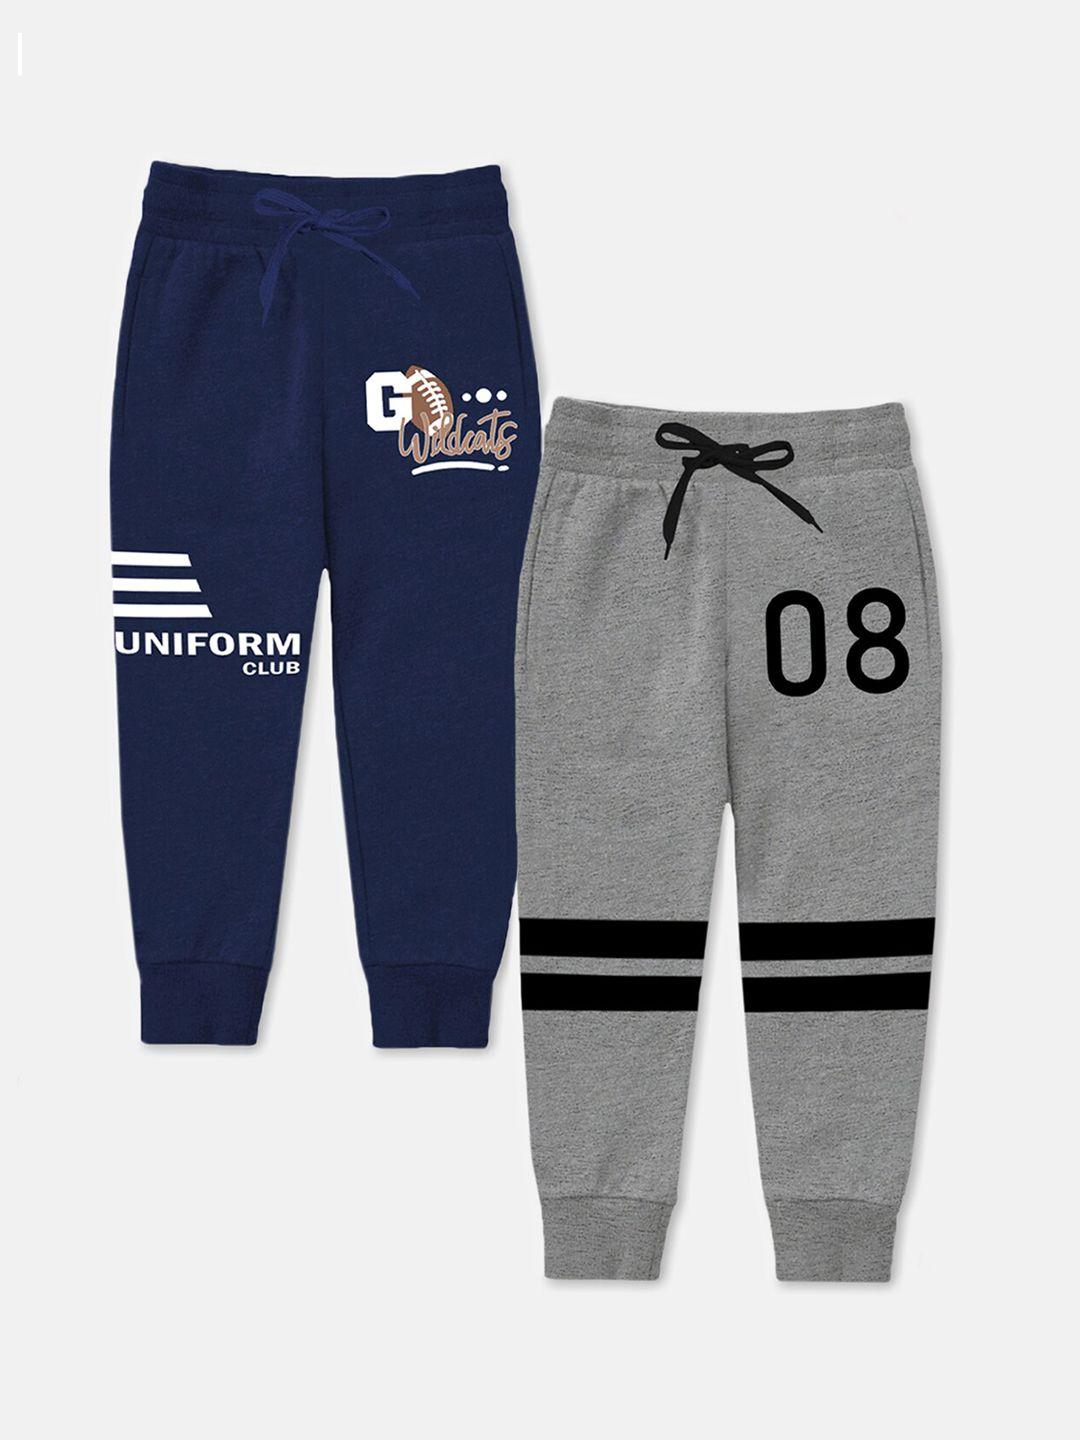 trampoline boys pack of 2 grey & blue printed cotton joggers